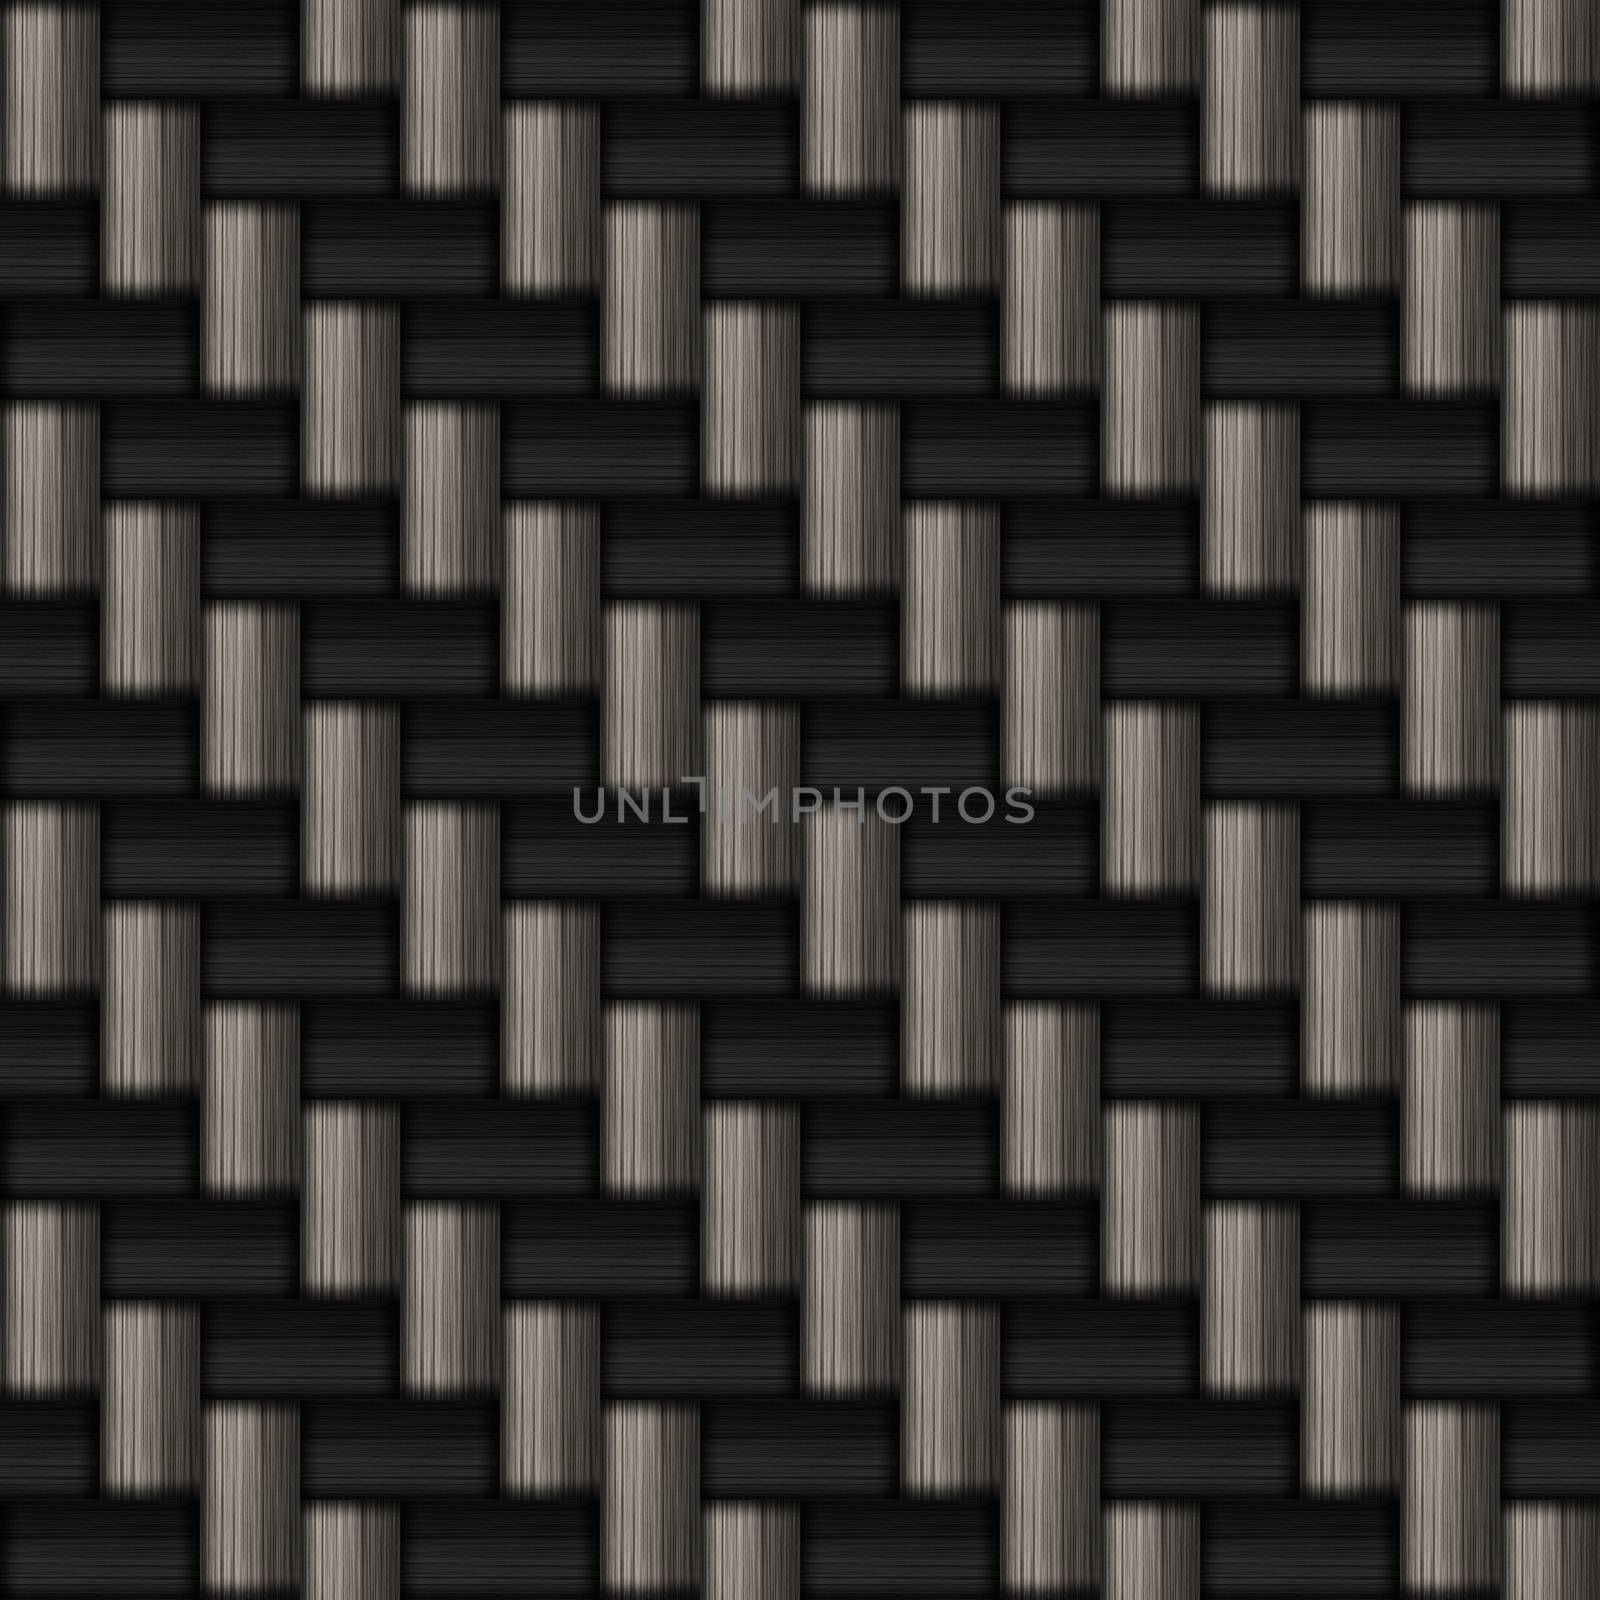 A diagonally woven carbon fiber background texture - a great art element for that "high-tech" look you are going for.  This tiles seamlessly as a pattern.